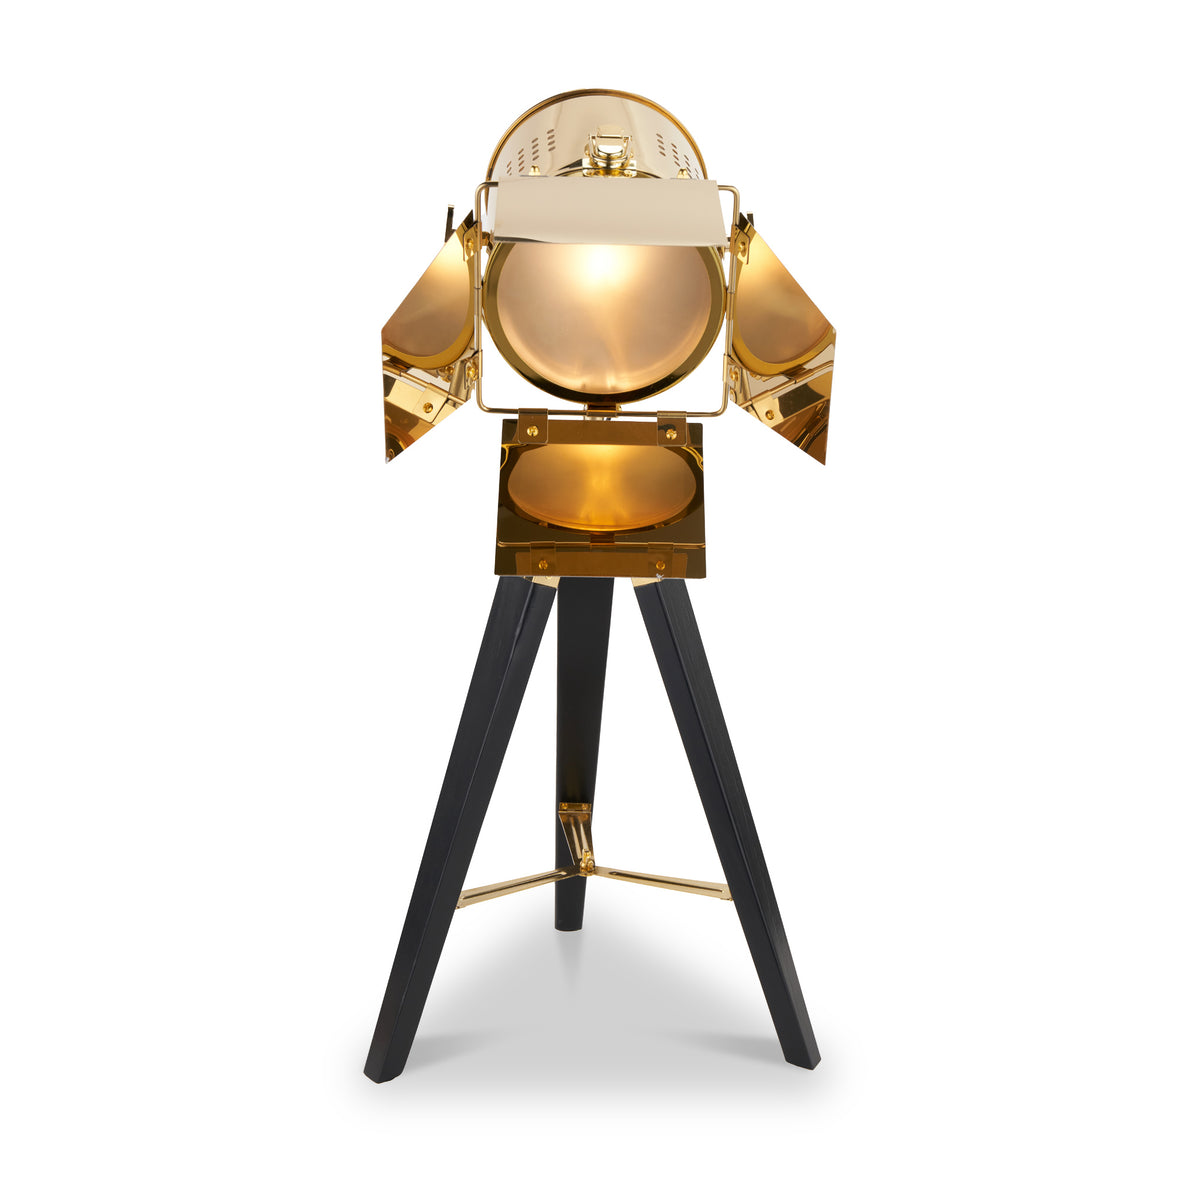 Hereford Gold and Black Tripod Table Lamp from Roseland Furniture